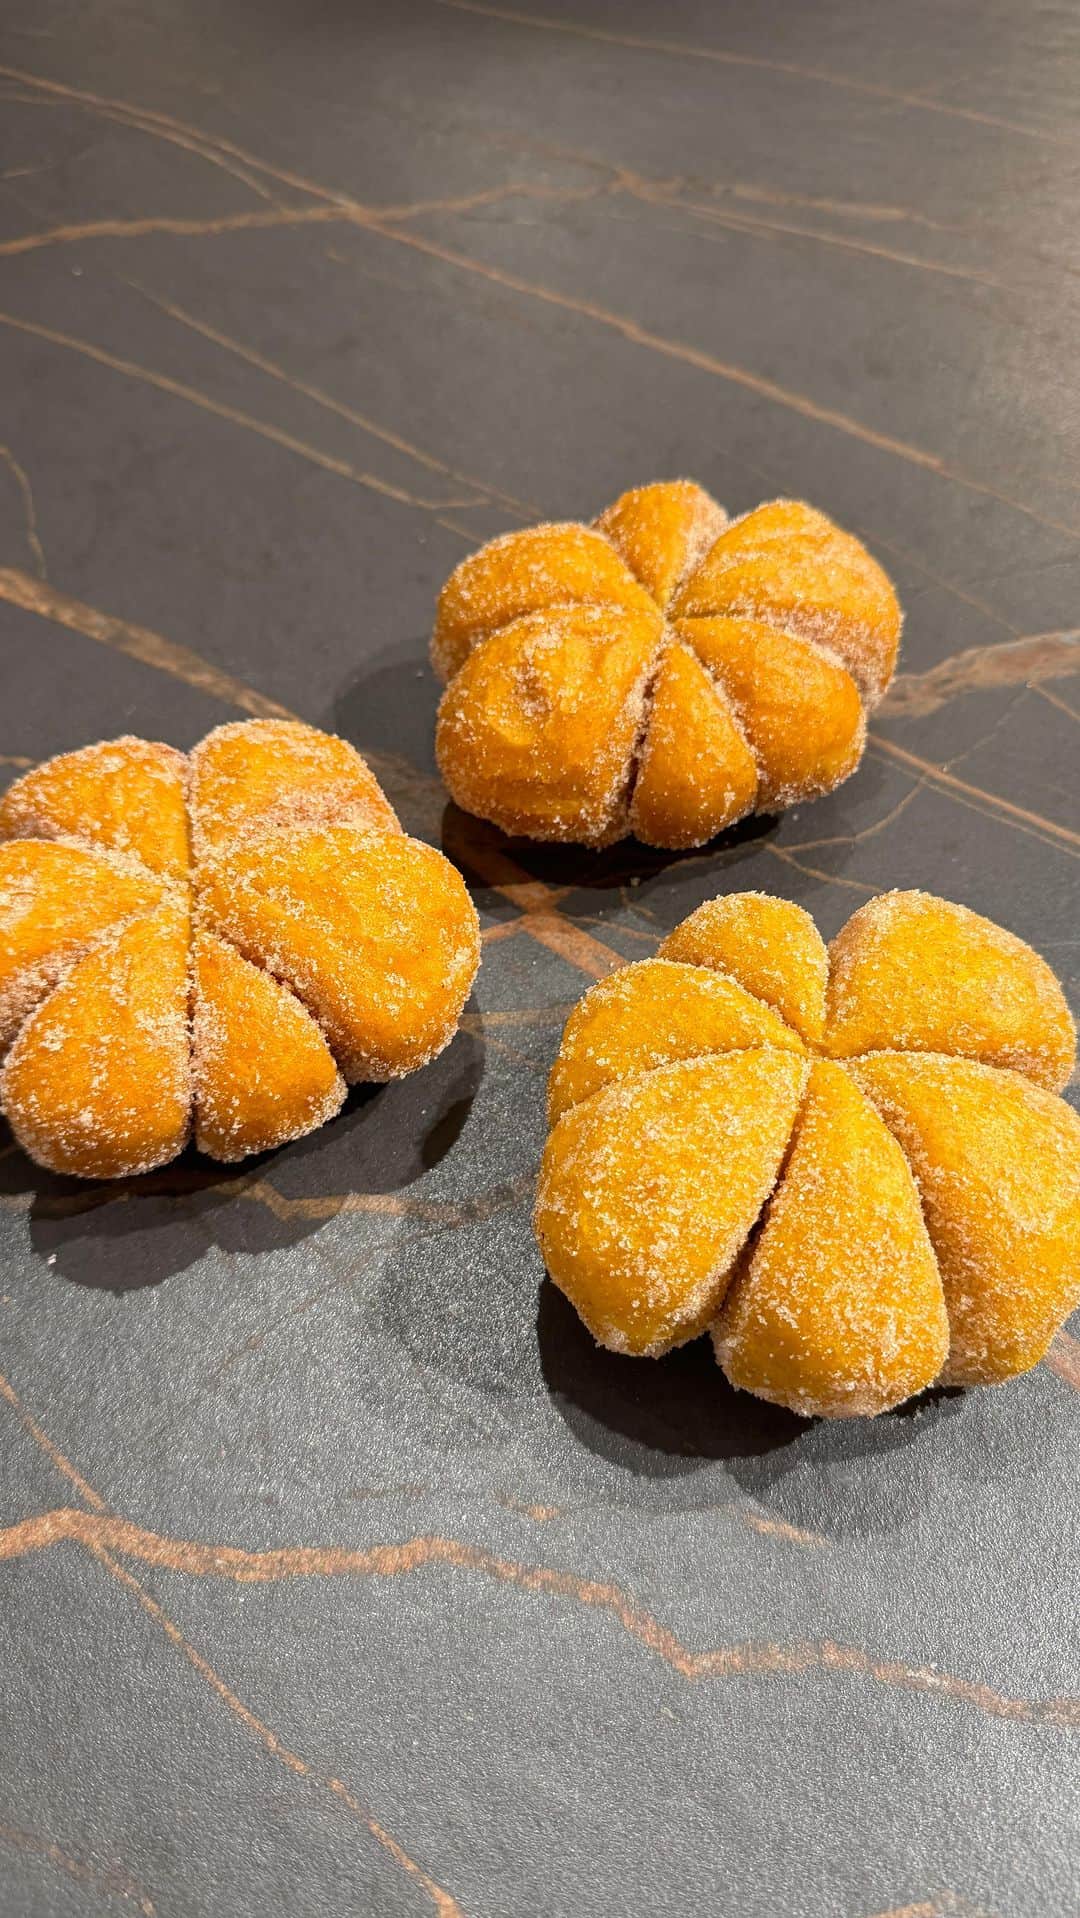 DOMINIQUE ANSEL BAKERYのインスタグラム：「Pumpkin Spiced Doughnuts for this weekend’s special at @dominiqueanselworkshop, soft and fluffy pumpkin brioche doughnuts with warm autumn spices and lightly tossed in cinnamon sugar. Here in Flatiron only today through Tuesday for Halloween. 🎃」